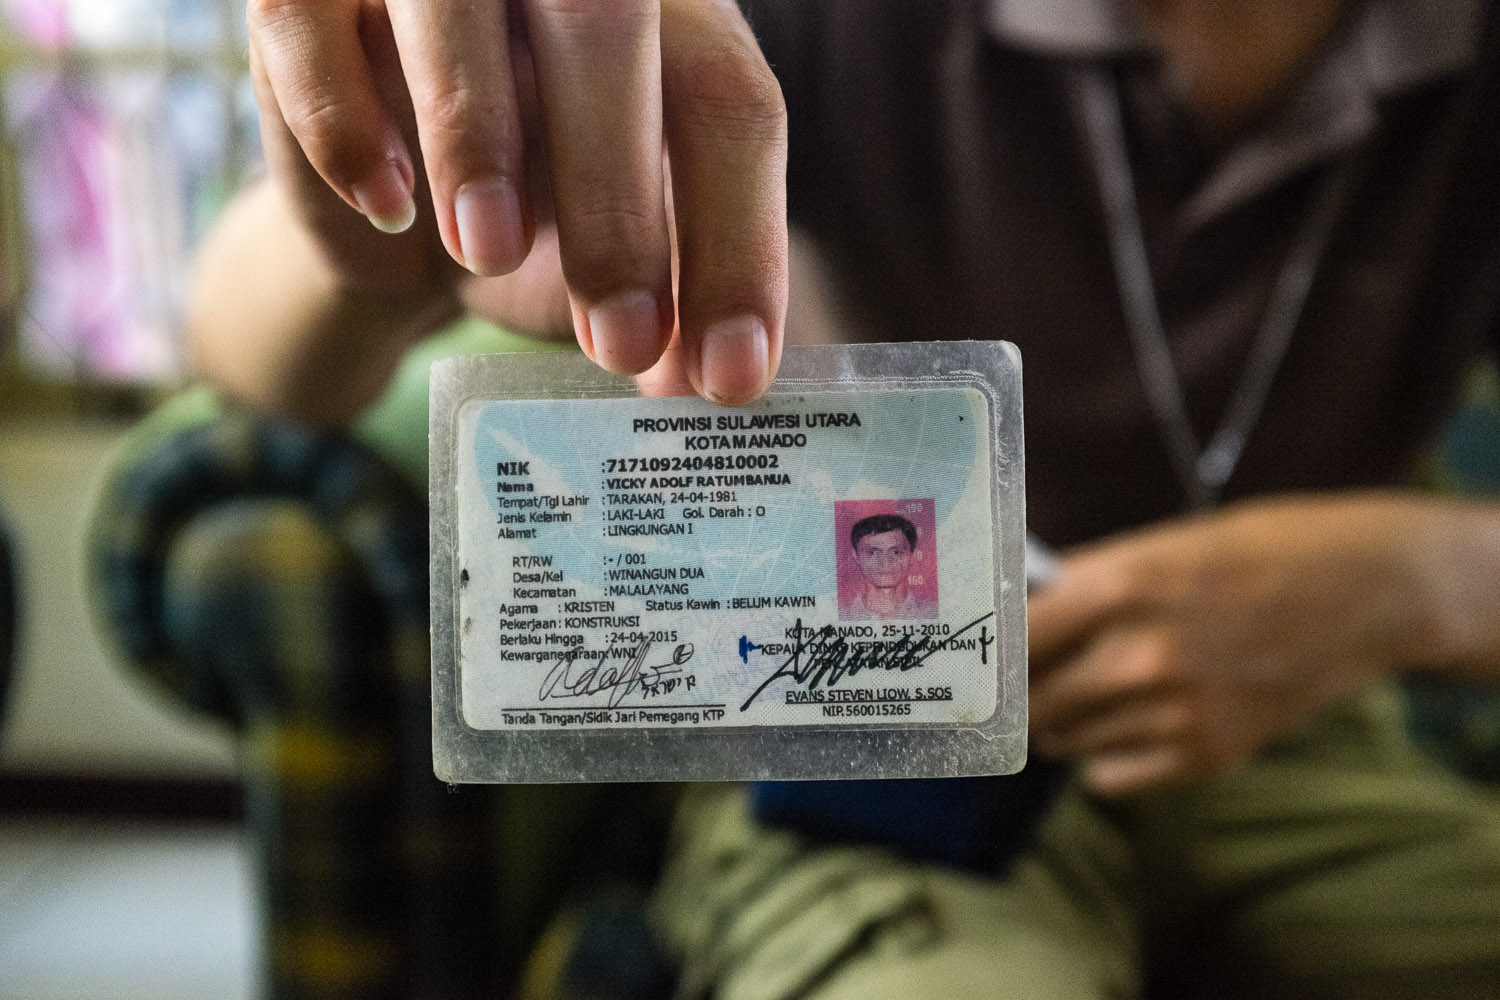   Judaism is not a recognized religion in Indonesia, which is the country with the world's largest Muslim population. Here, Vicky shows his ID card that denotes him as "Kristen", Christian in Bahasa Indones  